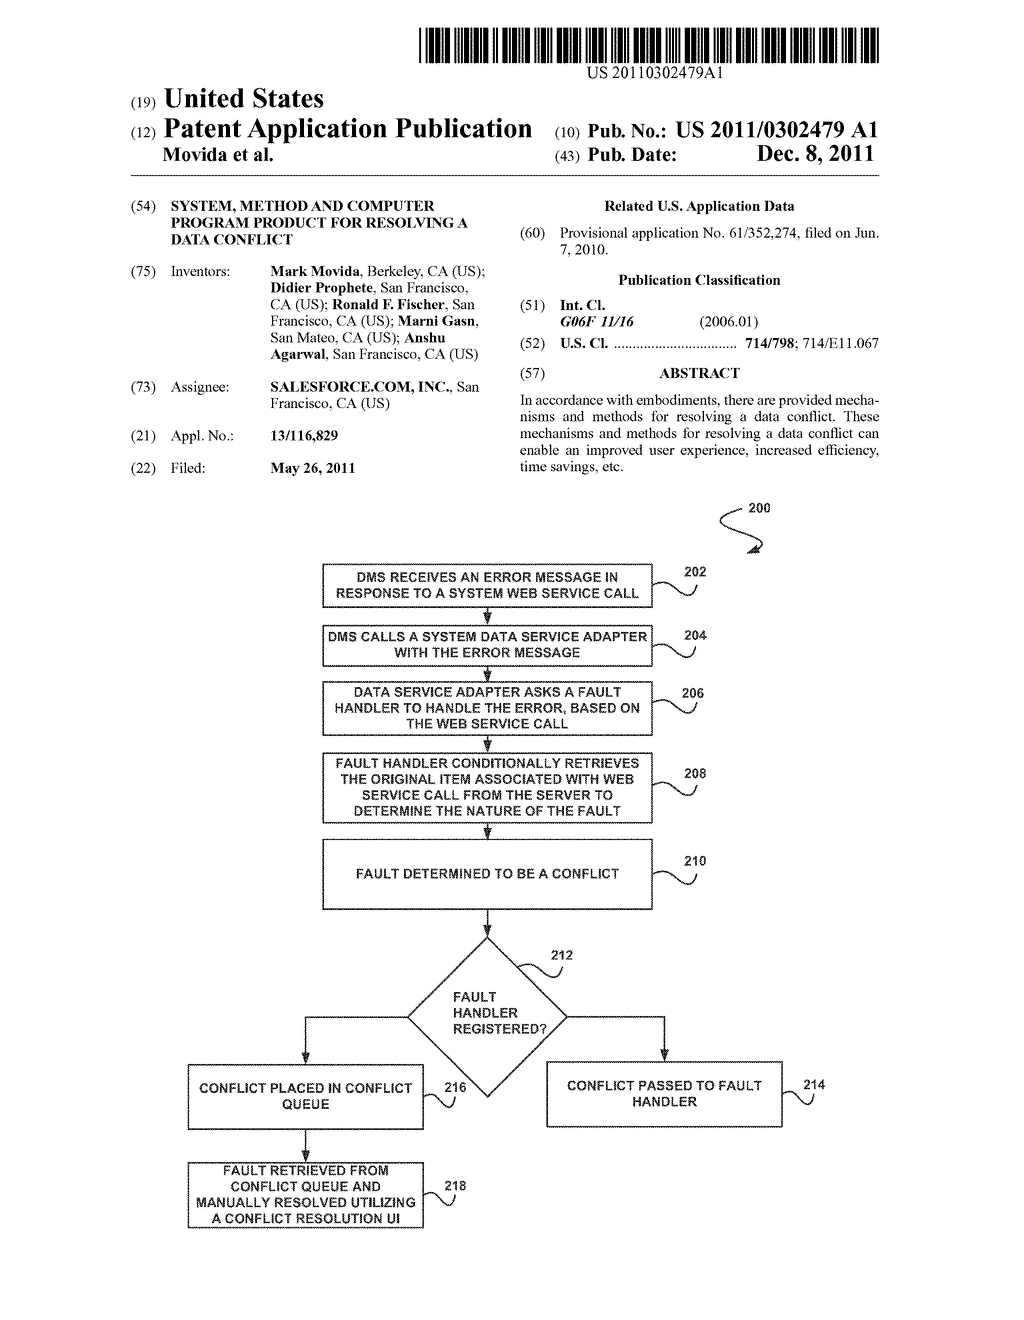 SYSTEM, METHOD AND COMPUTER PROGRAM PRODUCT FOR RESOLVING A DATA CONFLICT - diagram, schematic, and image 01